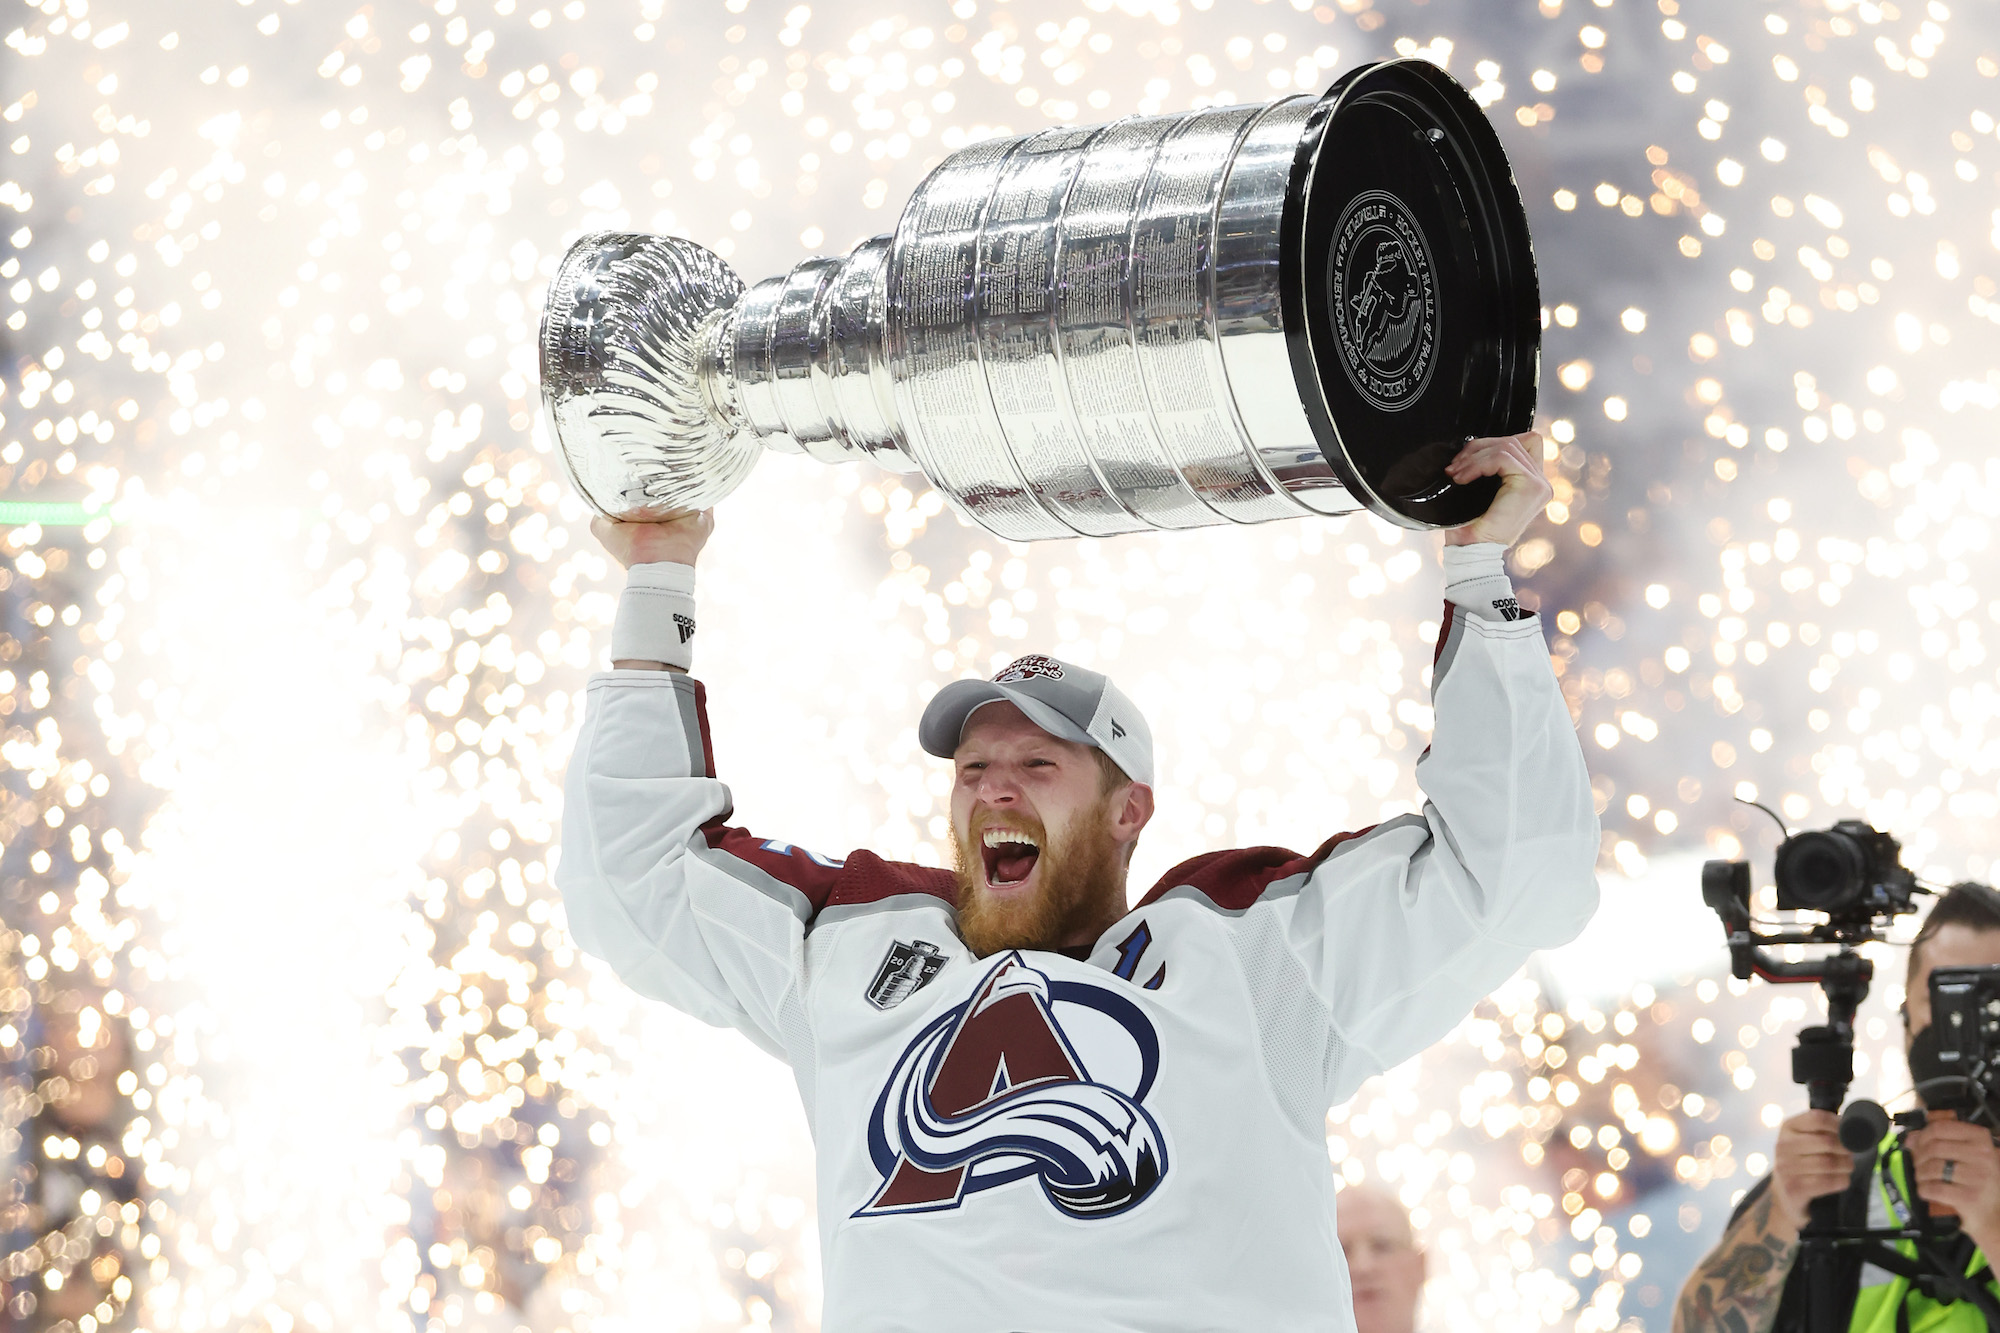 TAMPA, FLORIDA - JUNE 26: Gabriel Landeskog #92 of the Colorado Avalanche lifts the Stanley Cup after defeating the Tampa Bay Lightning 2-1 in Game Six of the 2022 NHL Stanley Cup Final at Amalie Arena on June 26, 2022 in Tampa, Florida. (Photo by Christian Petersen/Getty Images)